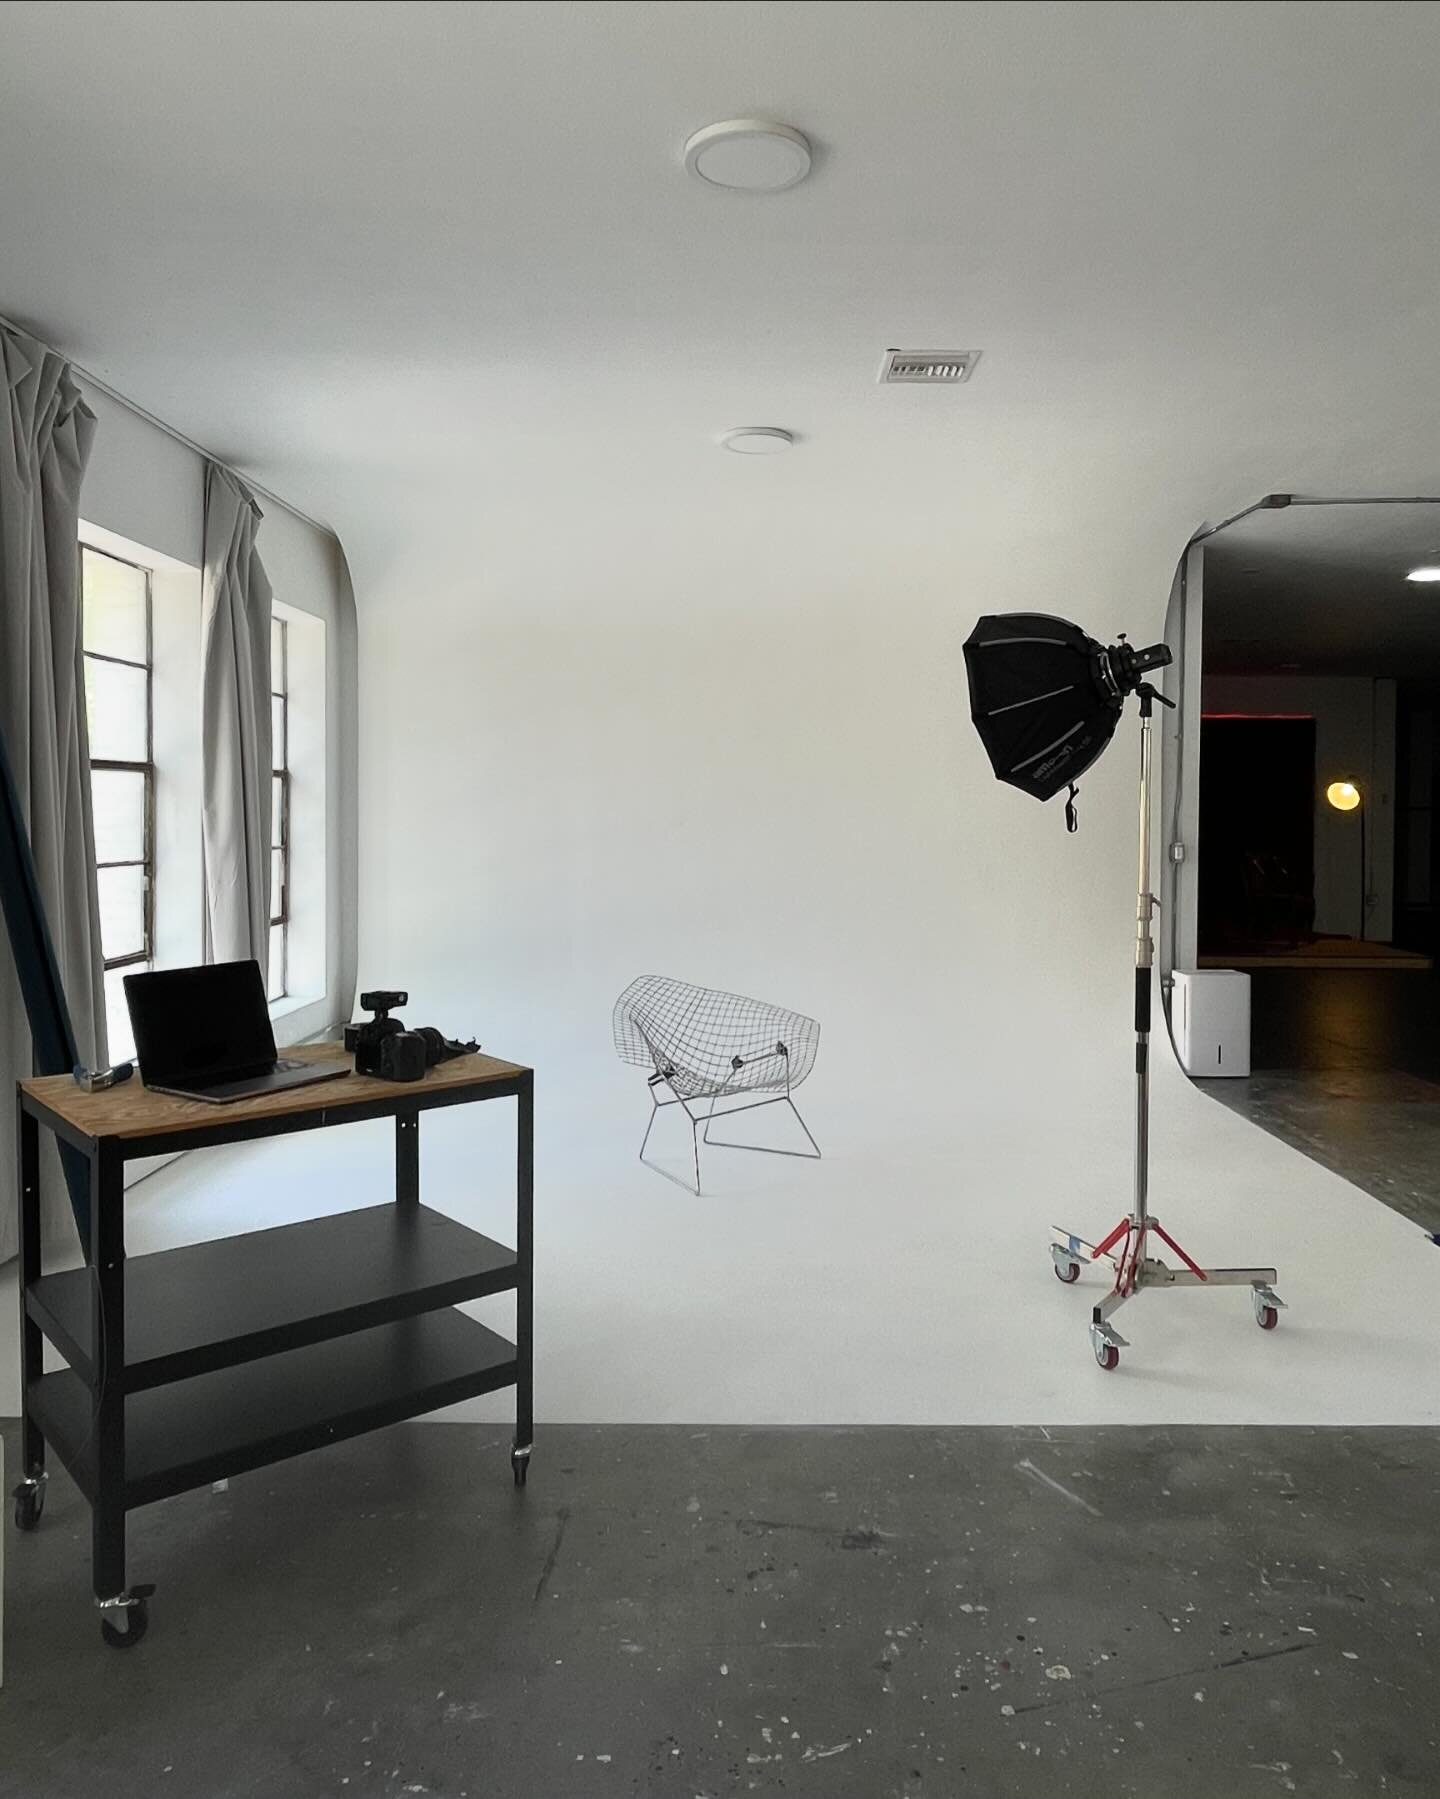 Roll in, set up and start creating. 
Taking full advantage of the sunny day to get that natural light coming through ☀️

Want to take a tour of the studio? Book a time on our website and come check us out.

_________
#tampaphotographer #tampaflorida 